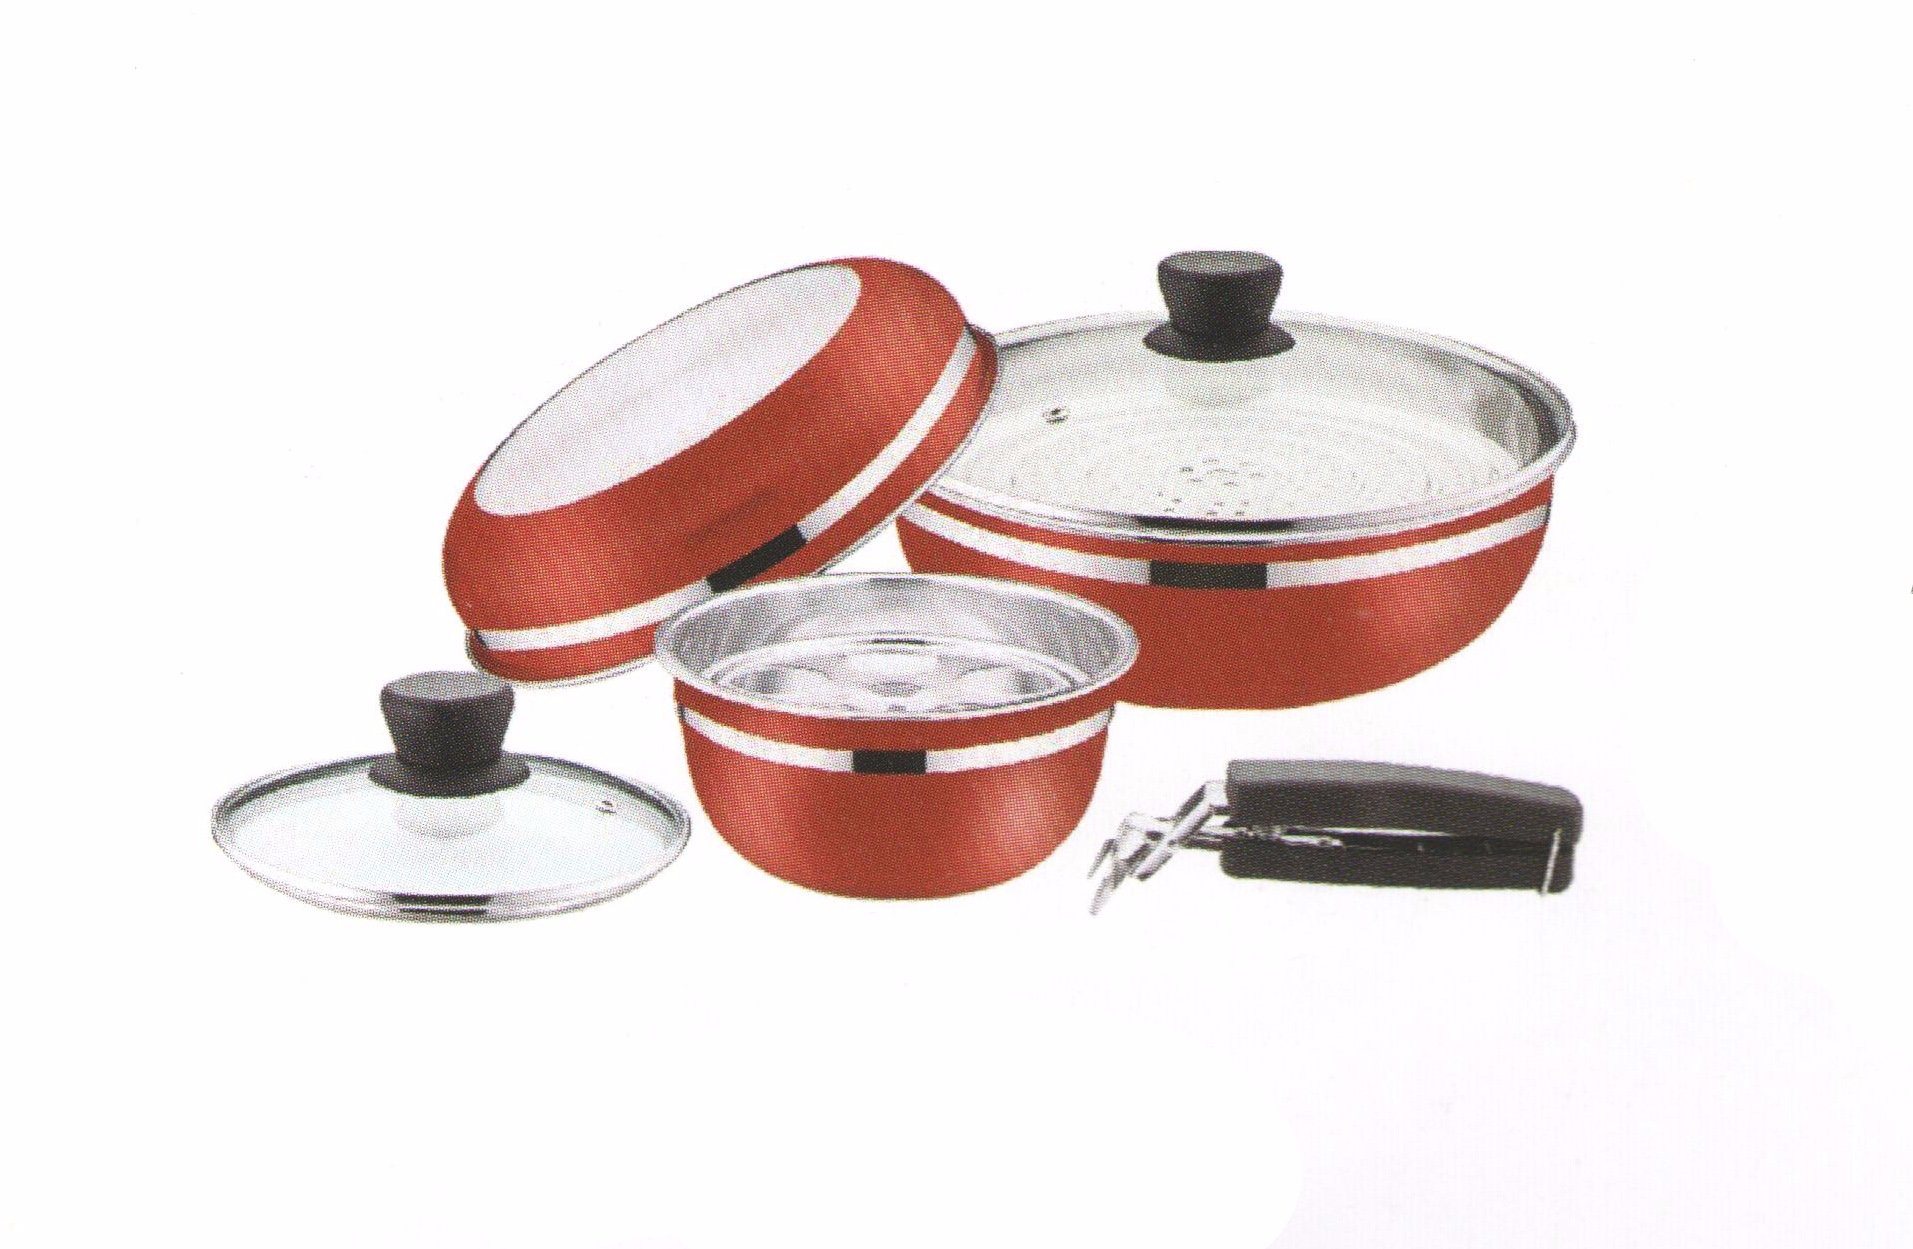 New Arrival China Double Handle Cookware Set -
 Home Appliance Non-Stick Coating Stainless Steel Cookware Frying Pan Cooking Pot PP001 – Long Prosper